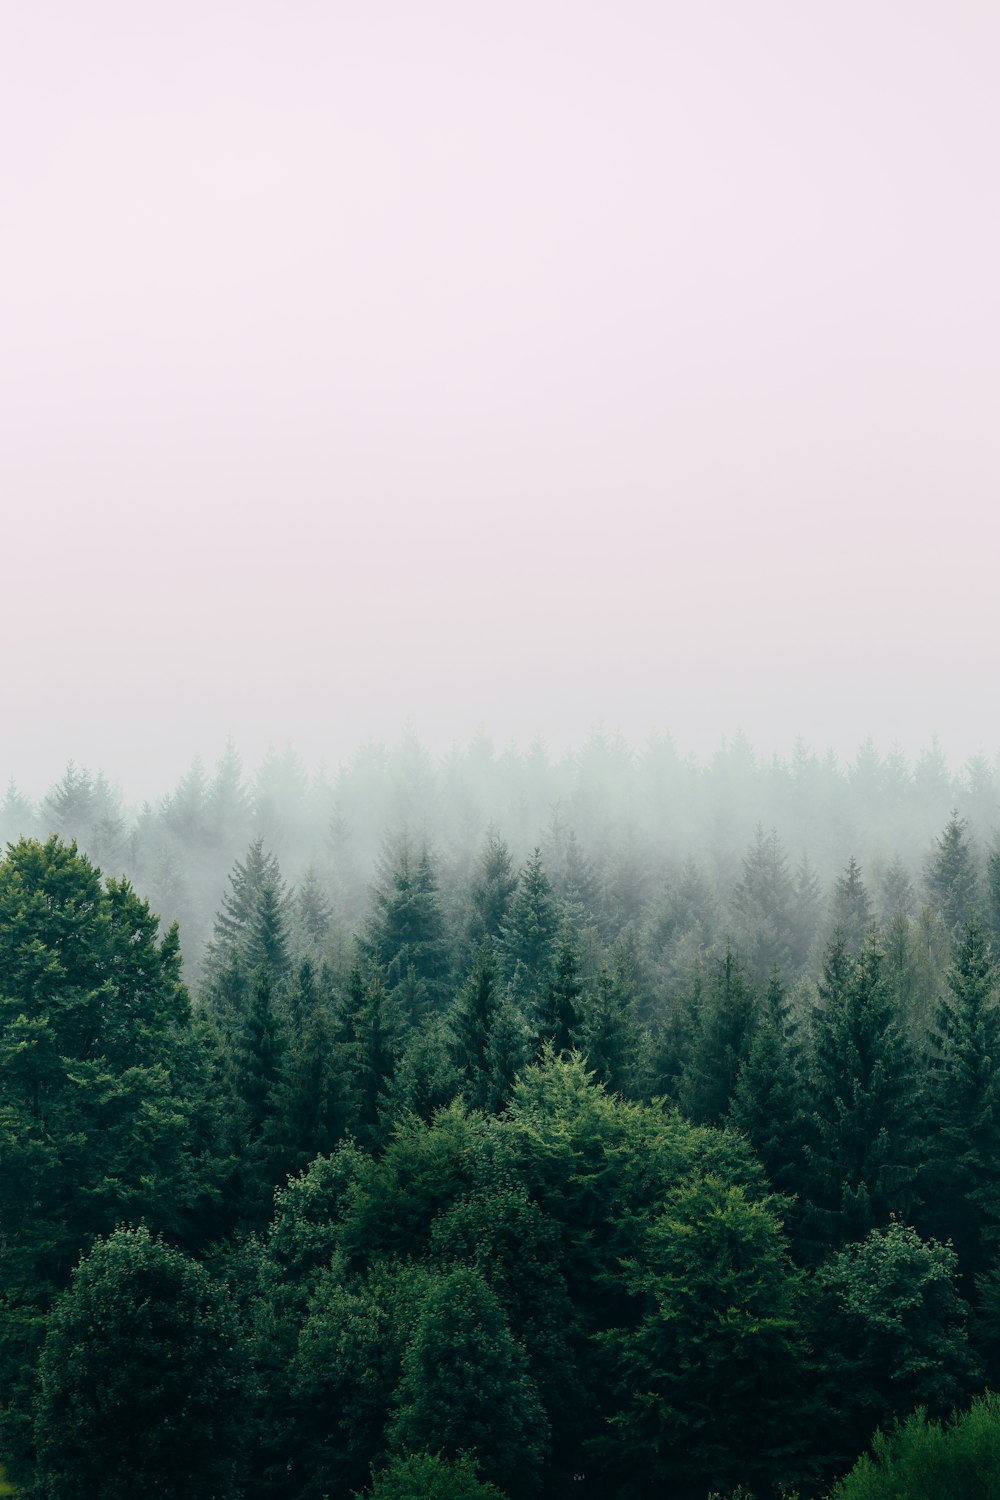 Green Environment Pictures | Download Free Images on Unsplash